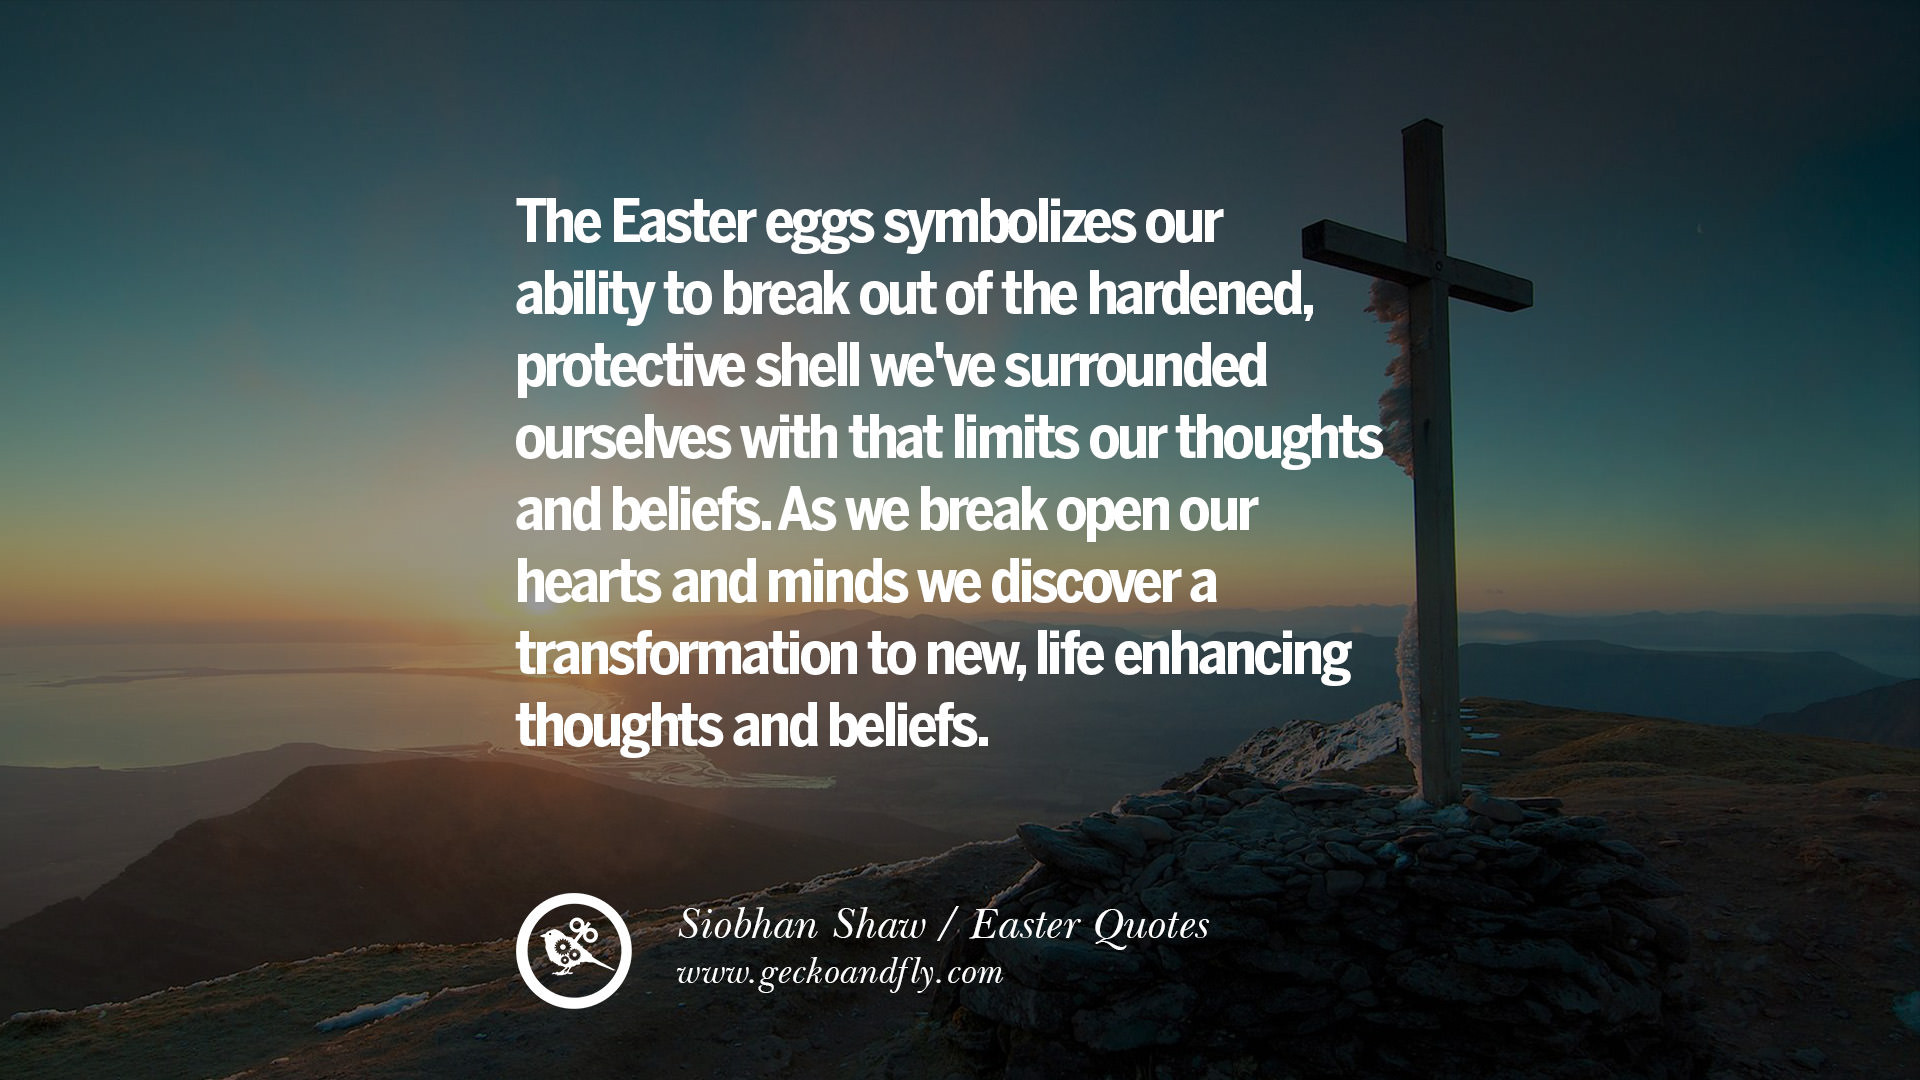 Easter New Beginnings Quotes
 30 Happy Easter Quotes A New Beginning And Second Chance